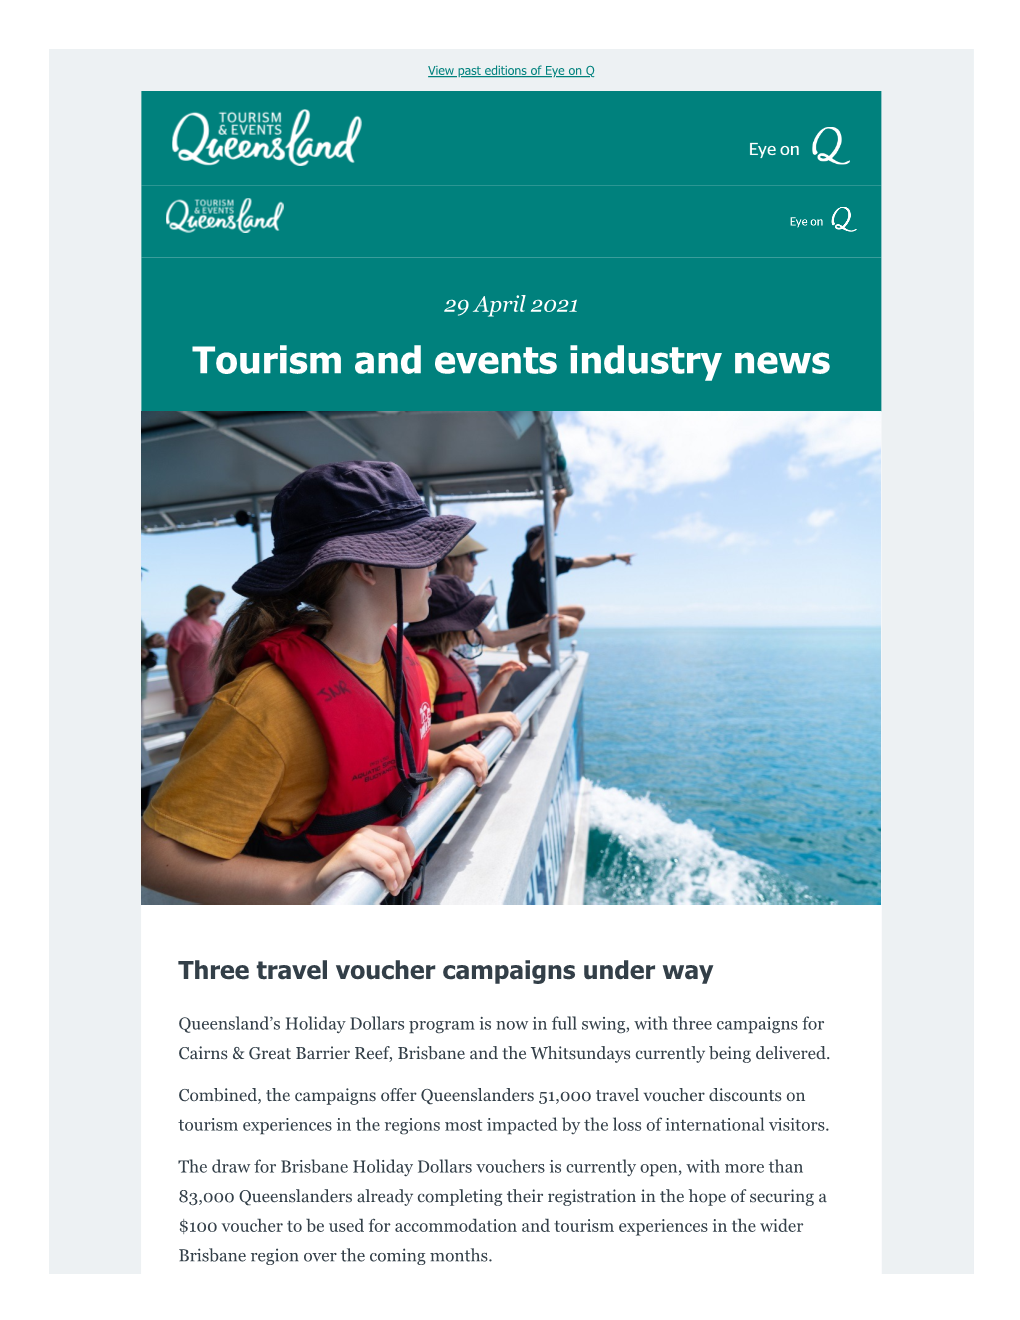 29 April 2021 Tourism and Events Industry News